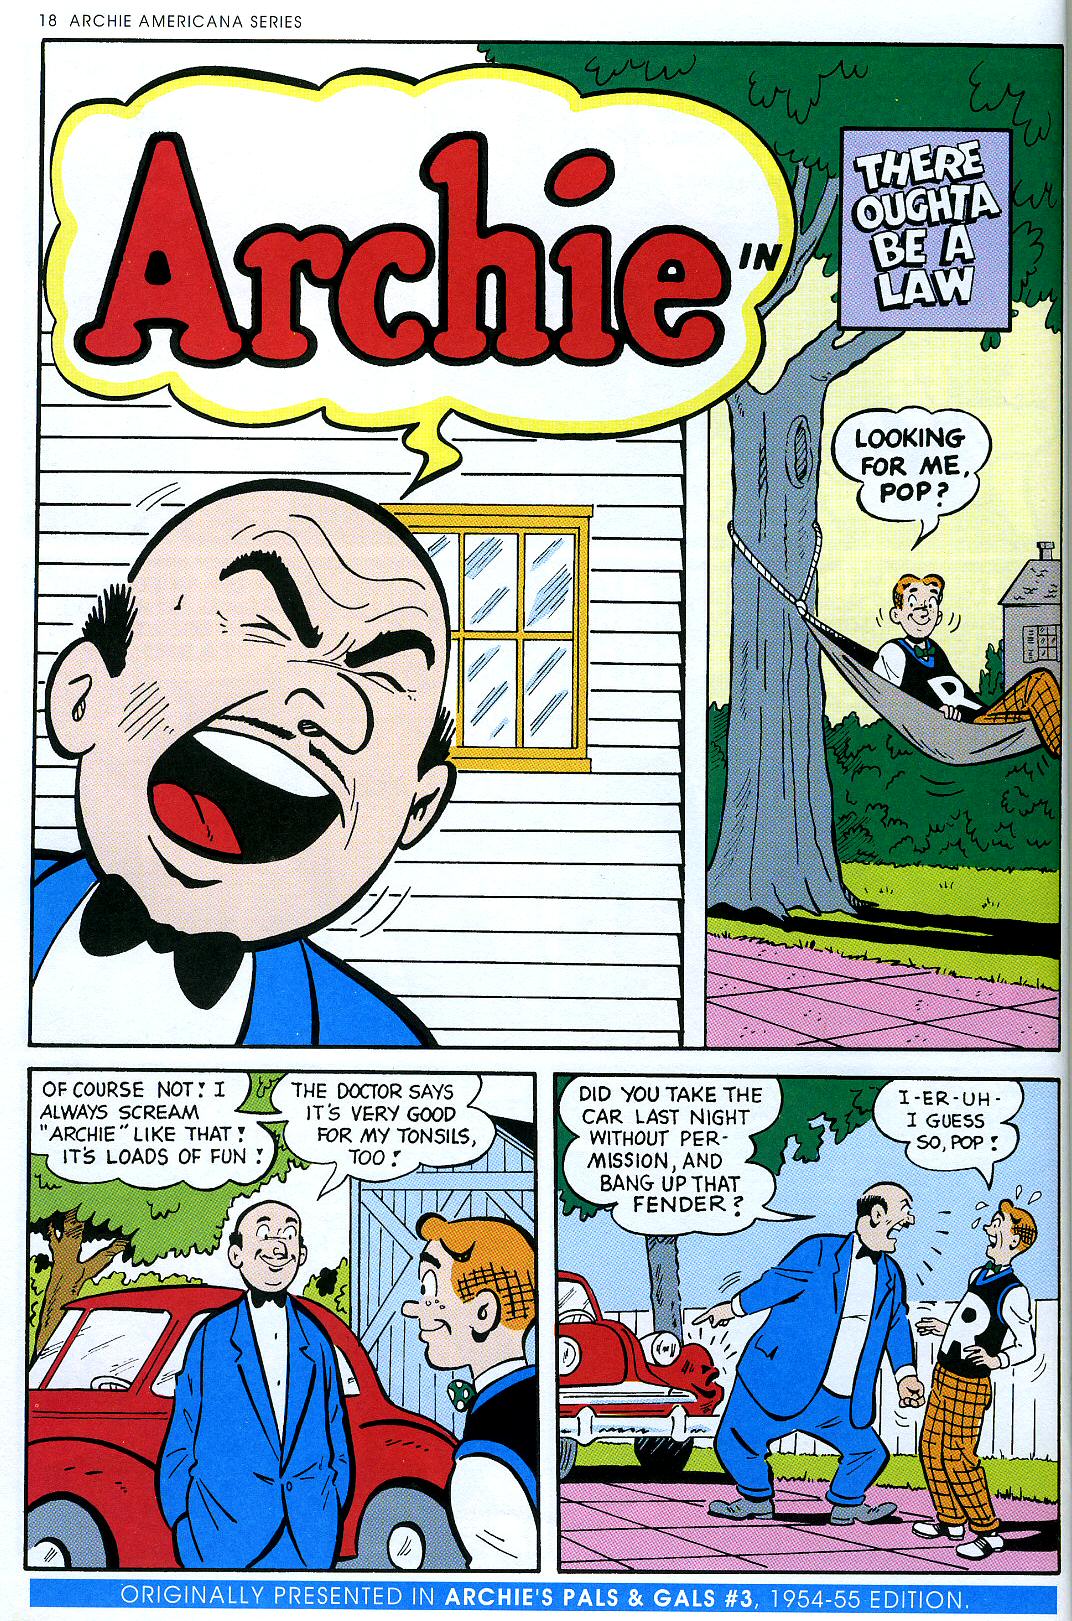 Read online Archie Americana Series comic -  Issue # TPB 2 - 20